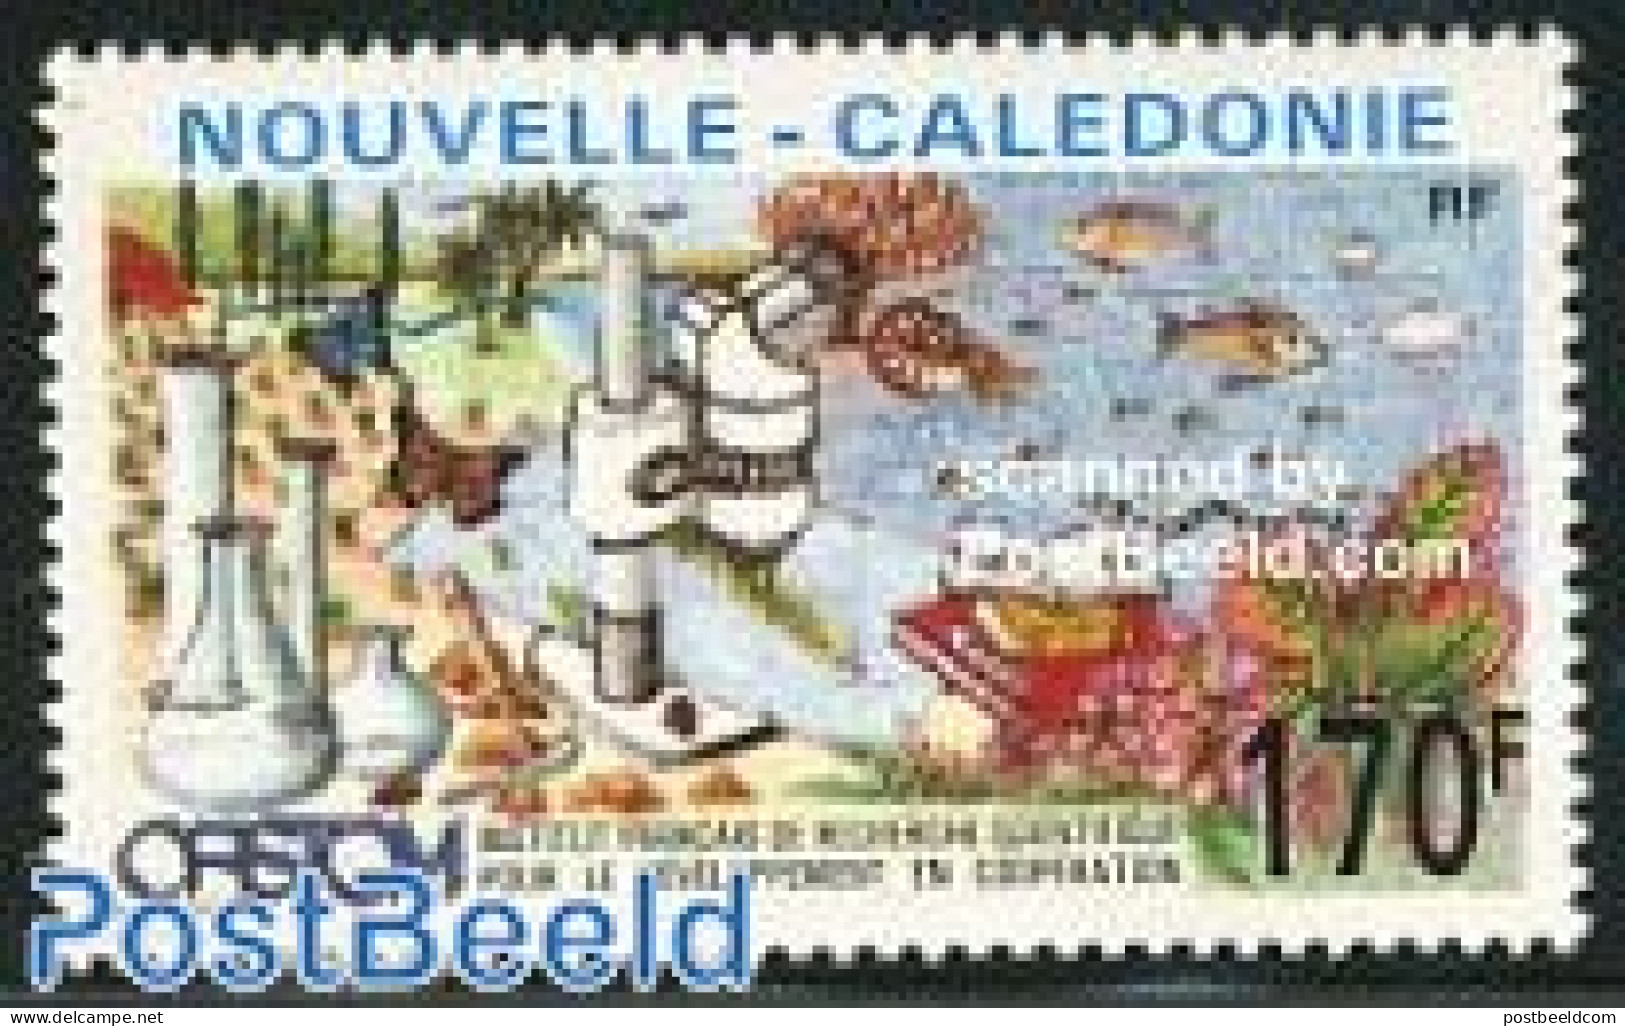 New Caledonia 1991 Science 1v, Mint NH, Nature - Science - Butterflies - Fish - Chemistry & Chemists - Art - Books - Unused Stamps